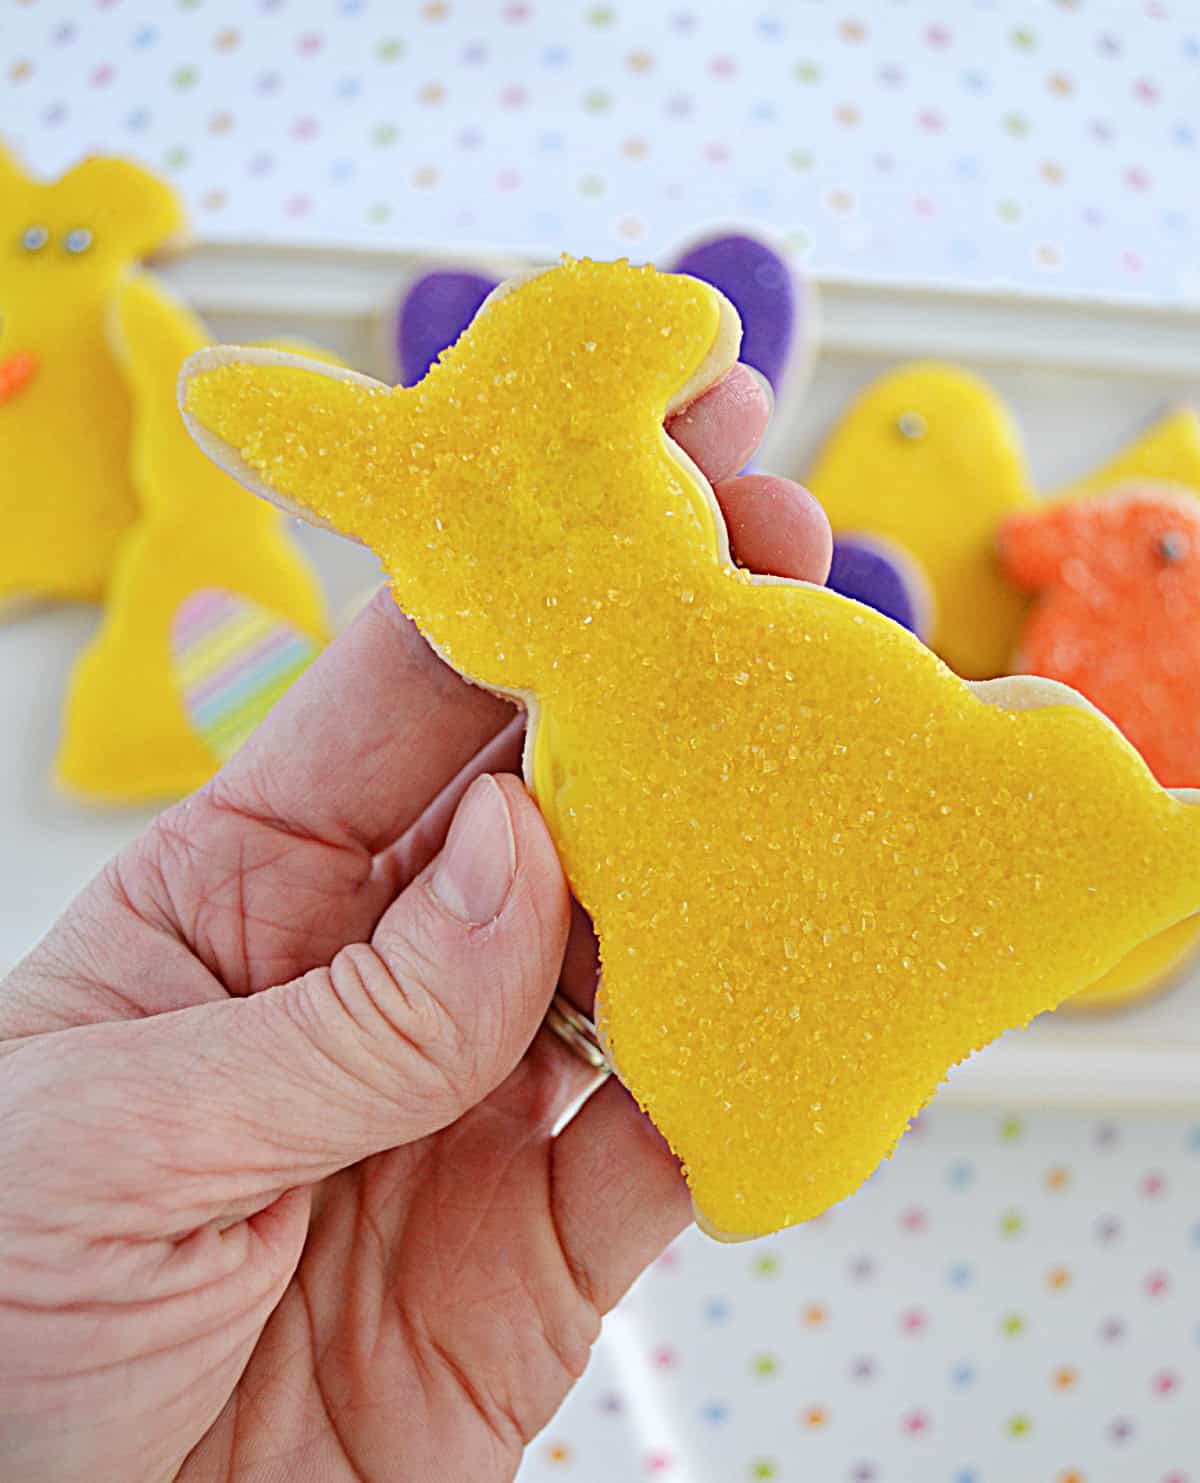 A hand holding a bunny sugar cookie with yellow icing and sugar on it.